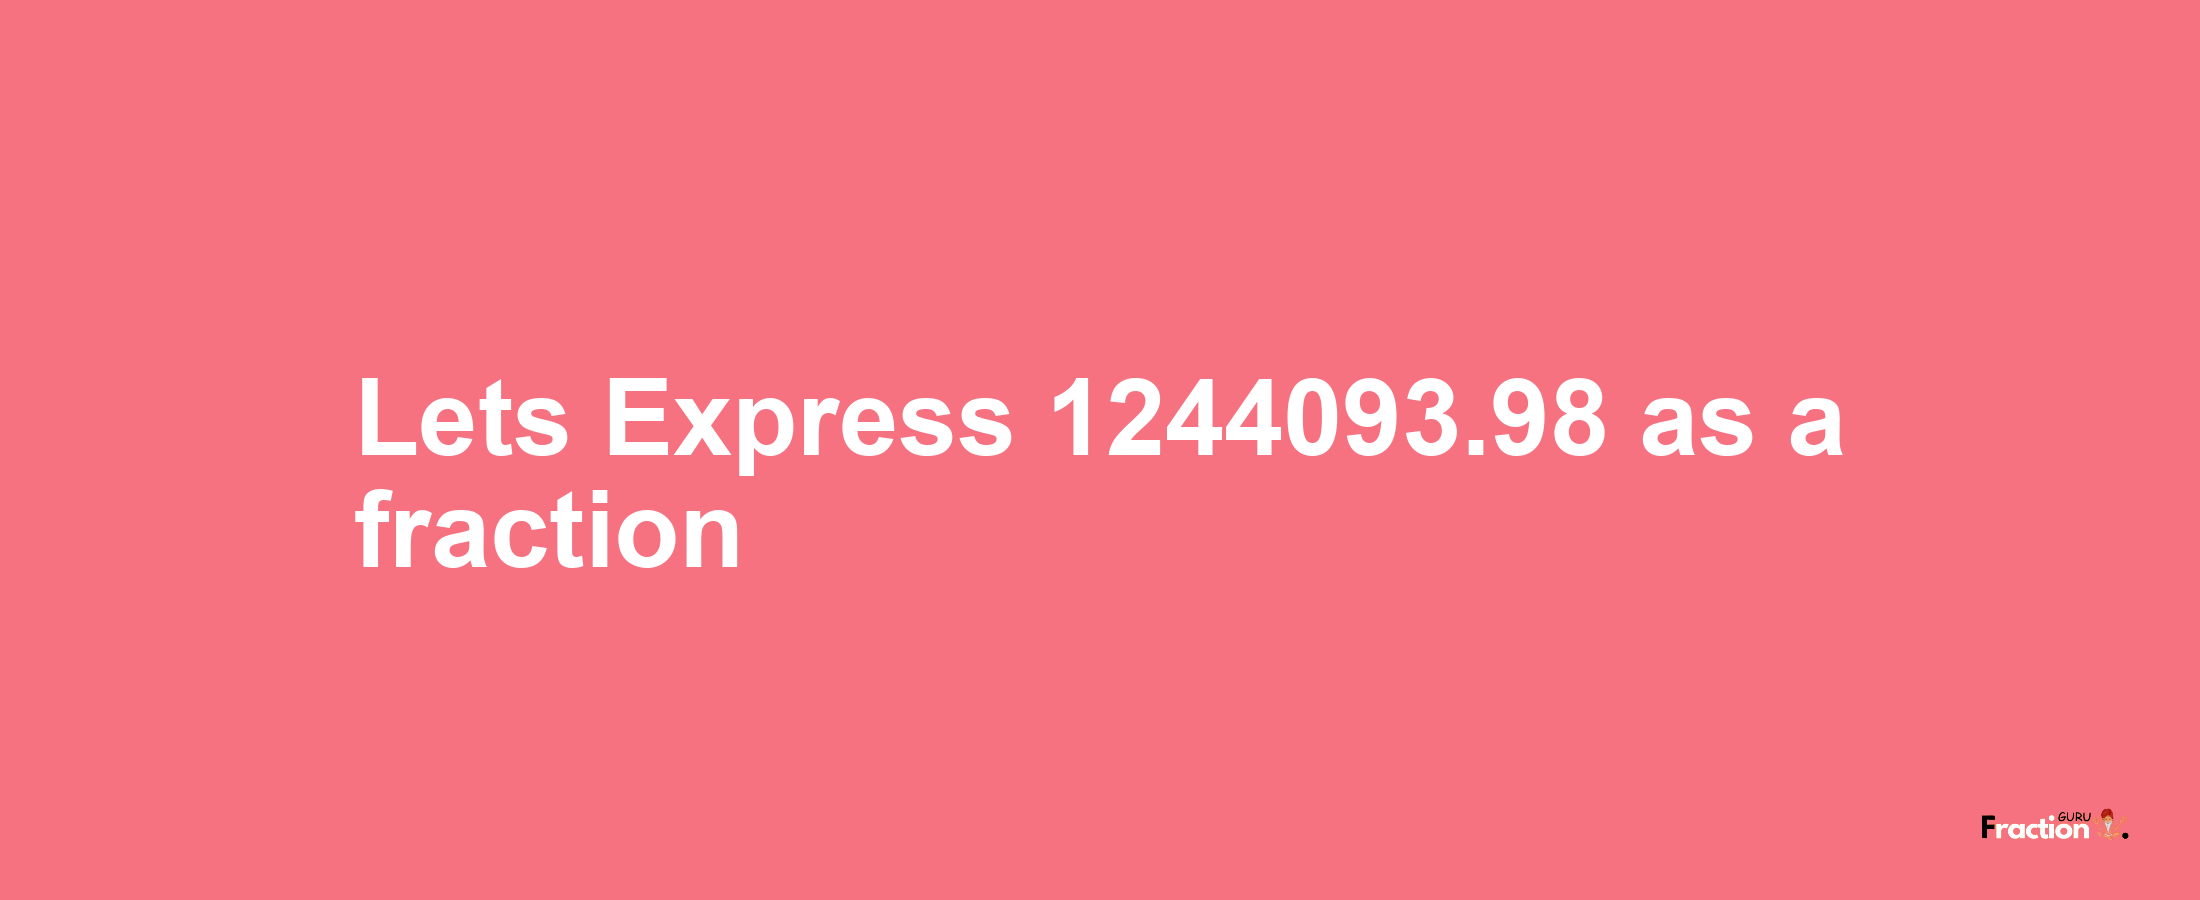 Lets Express 1244093.98 as afraction